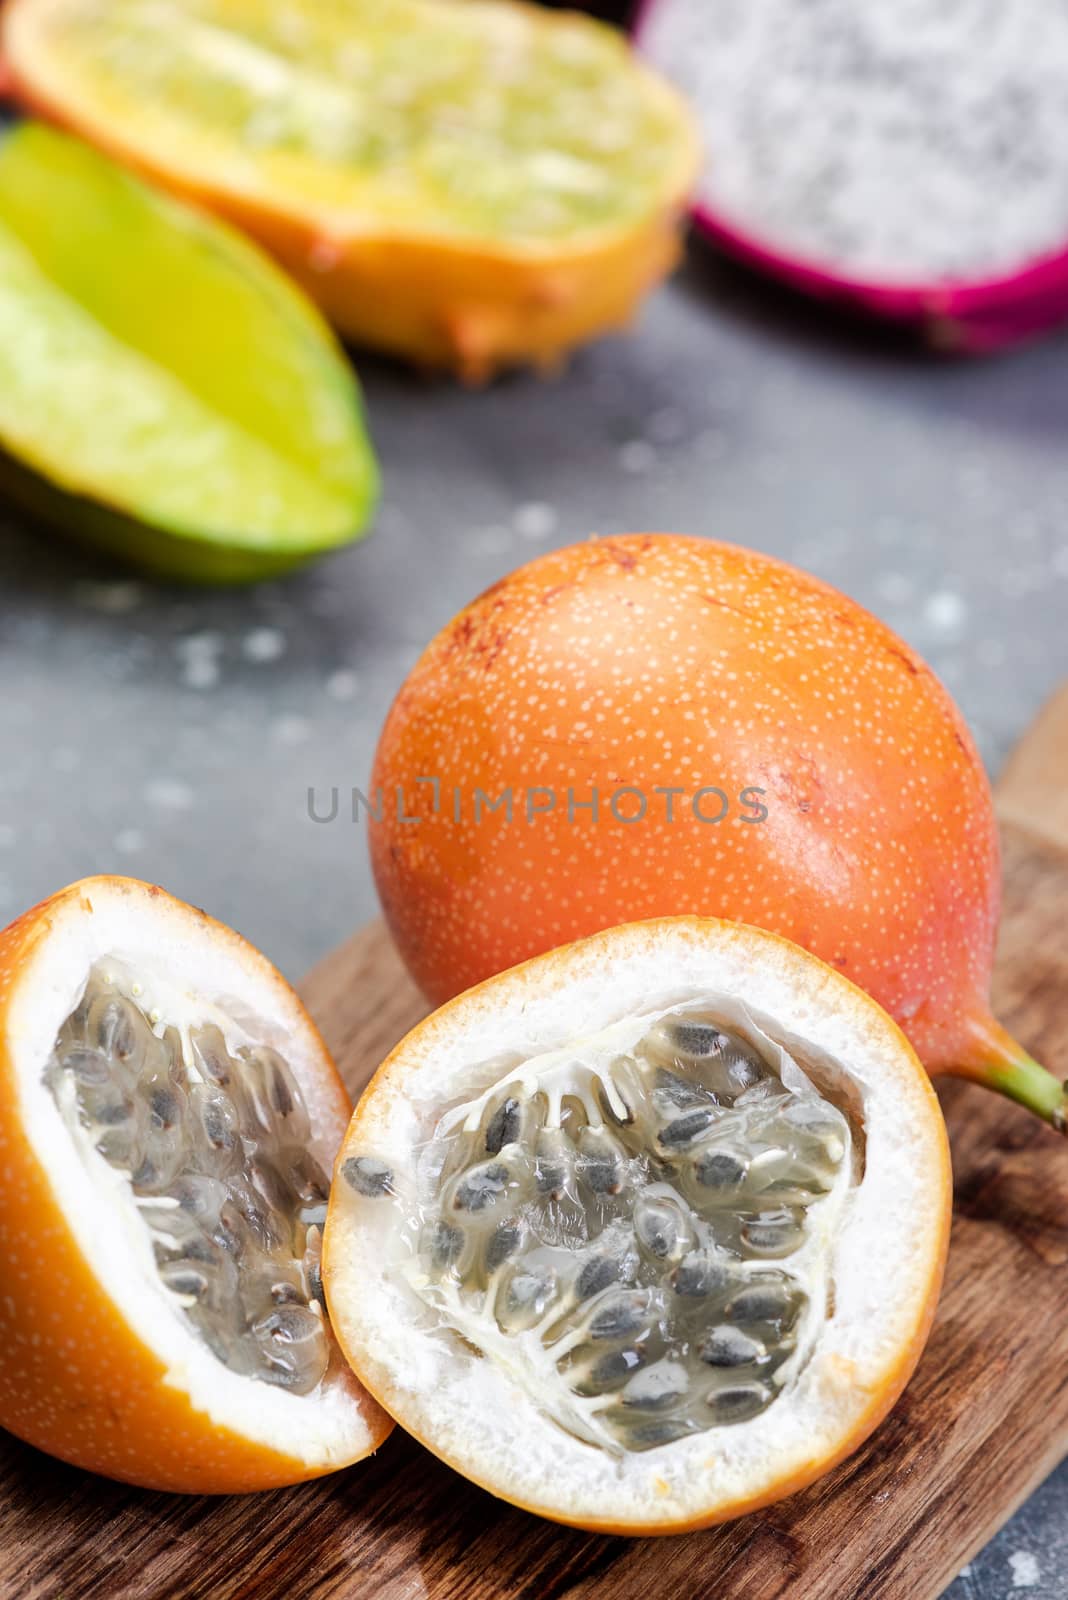 Granadilla or Grenadia Passionfruit Cut in Half Exotic Fruits on by merc67